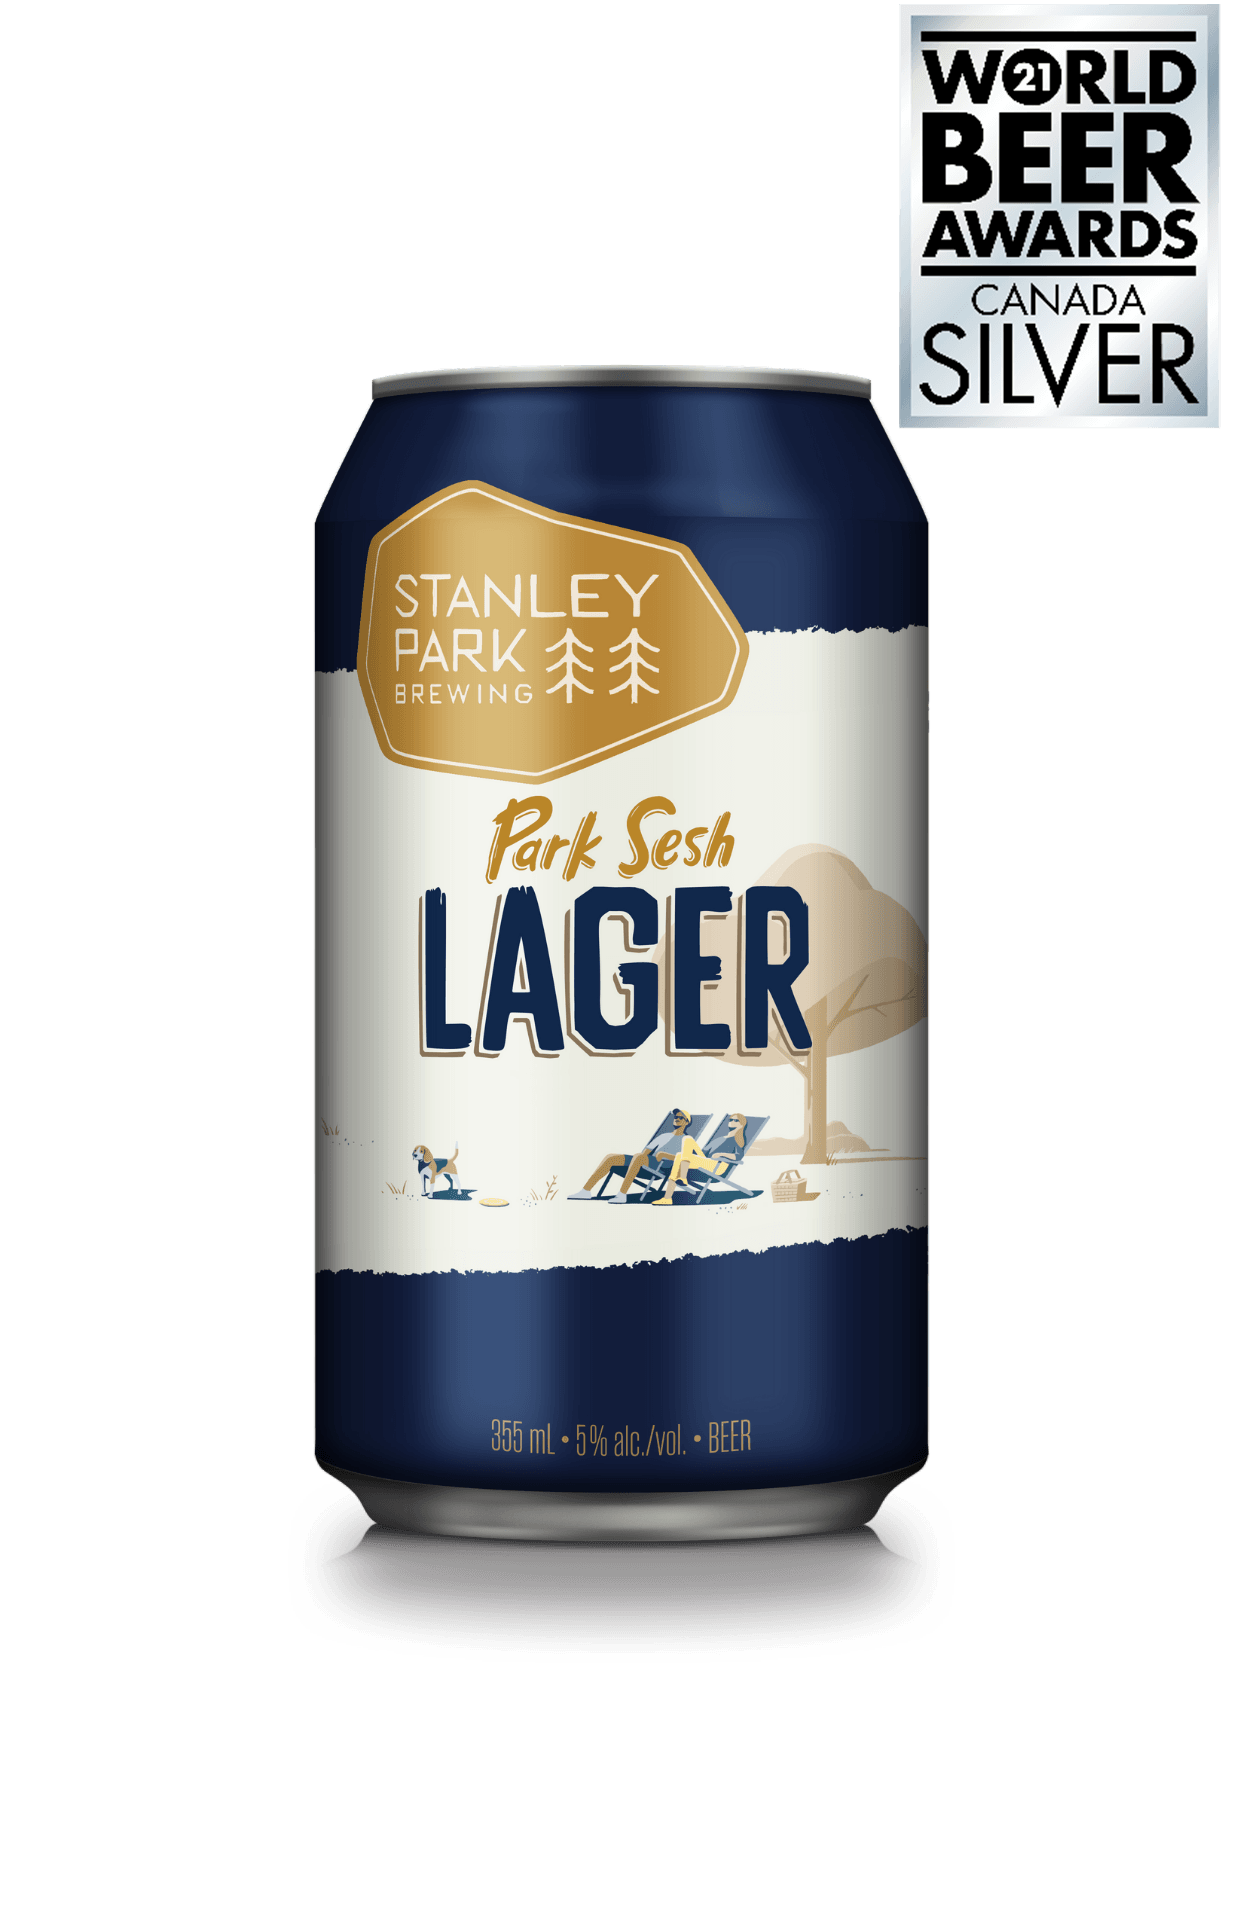 a can of park sesh lager from stanley park brewing with silver world beer award